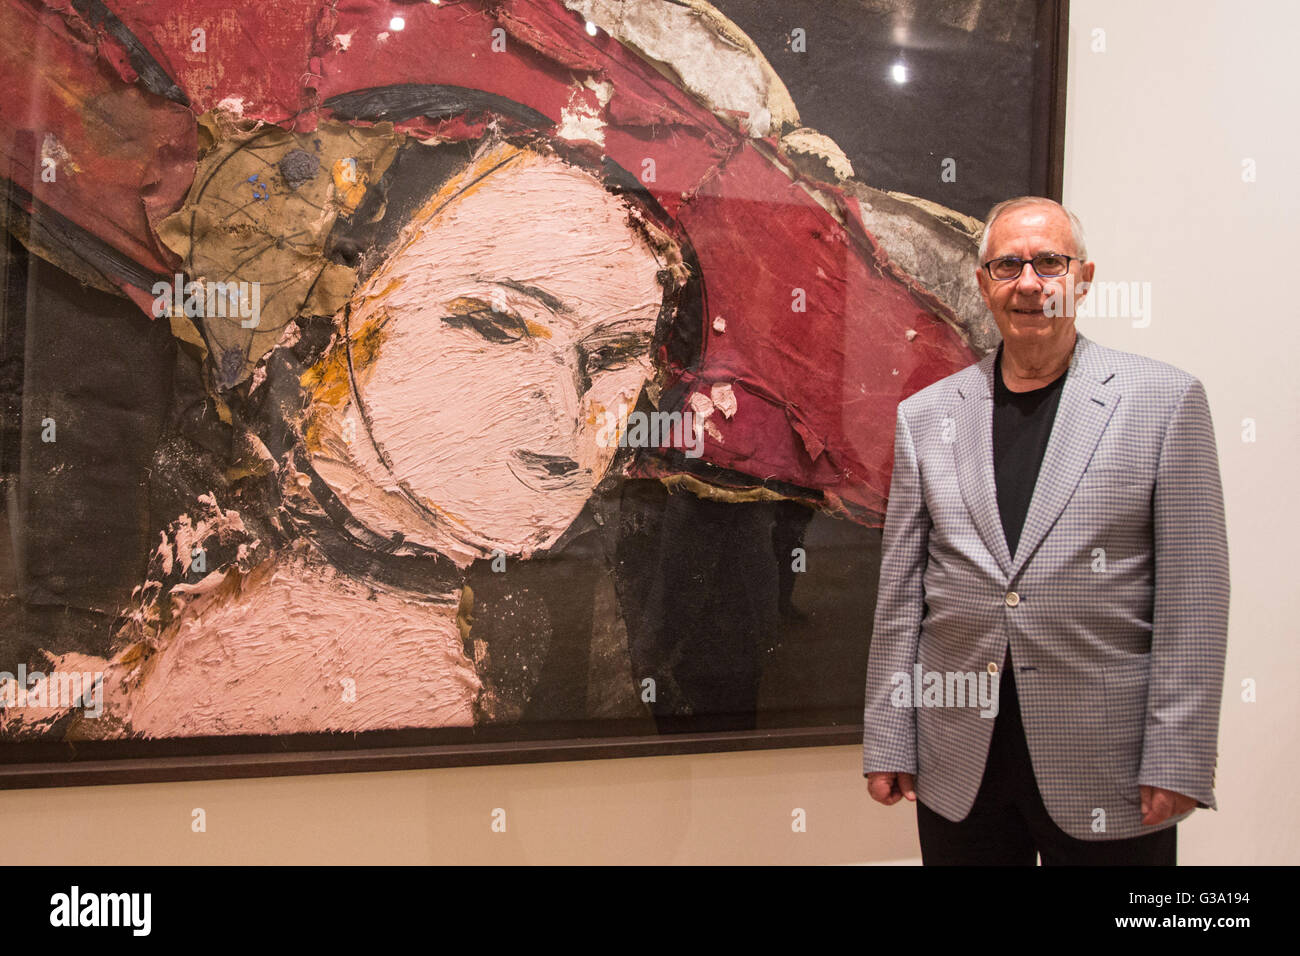 London, UK. 9 June 2016. Pictured: Spanish artist Manolo Valdes at the exhibition with his painting Cranach como pretexto, 2016. Marlborough Fine Art present the exhibition Manolo Valdes: Recent Work, Paintings & Sculptures from 10 June to 16 July 2016. Stock Photo